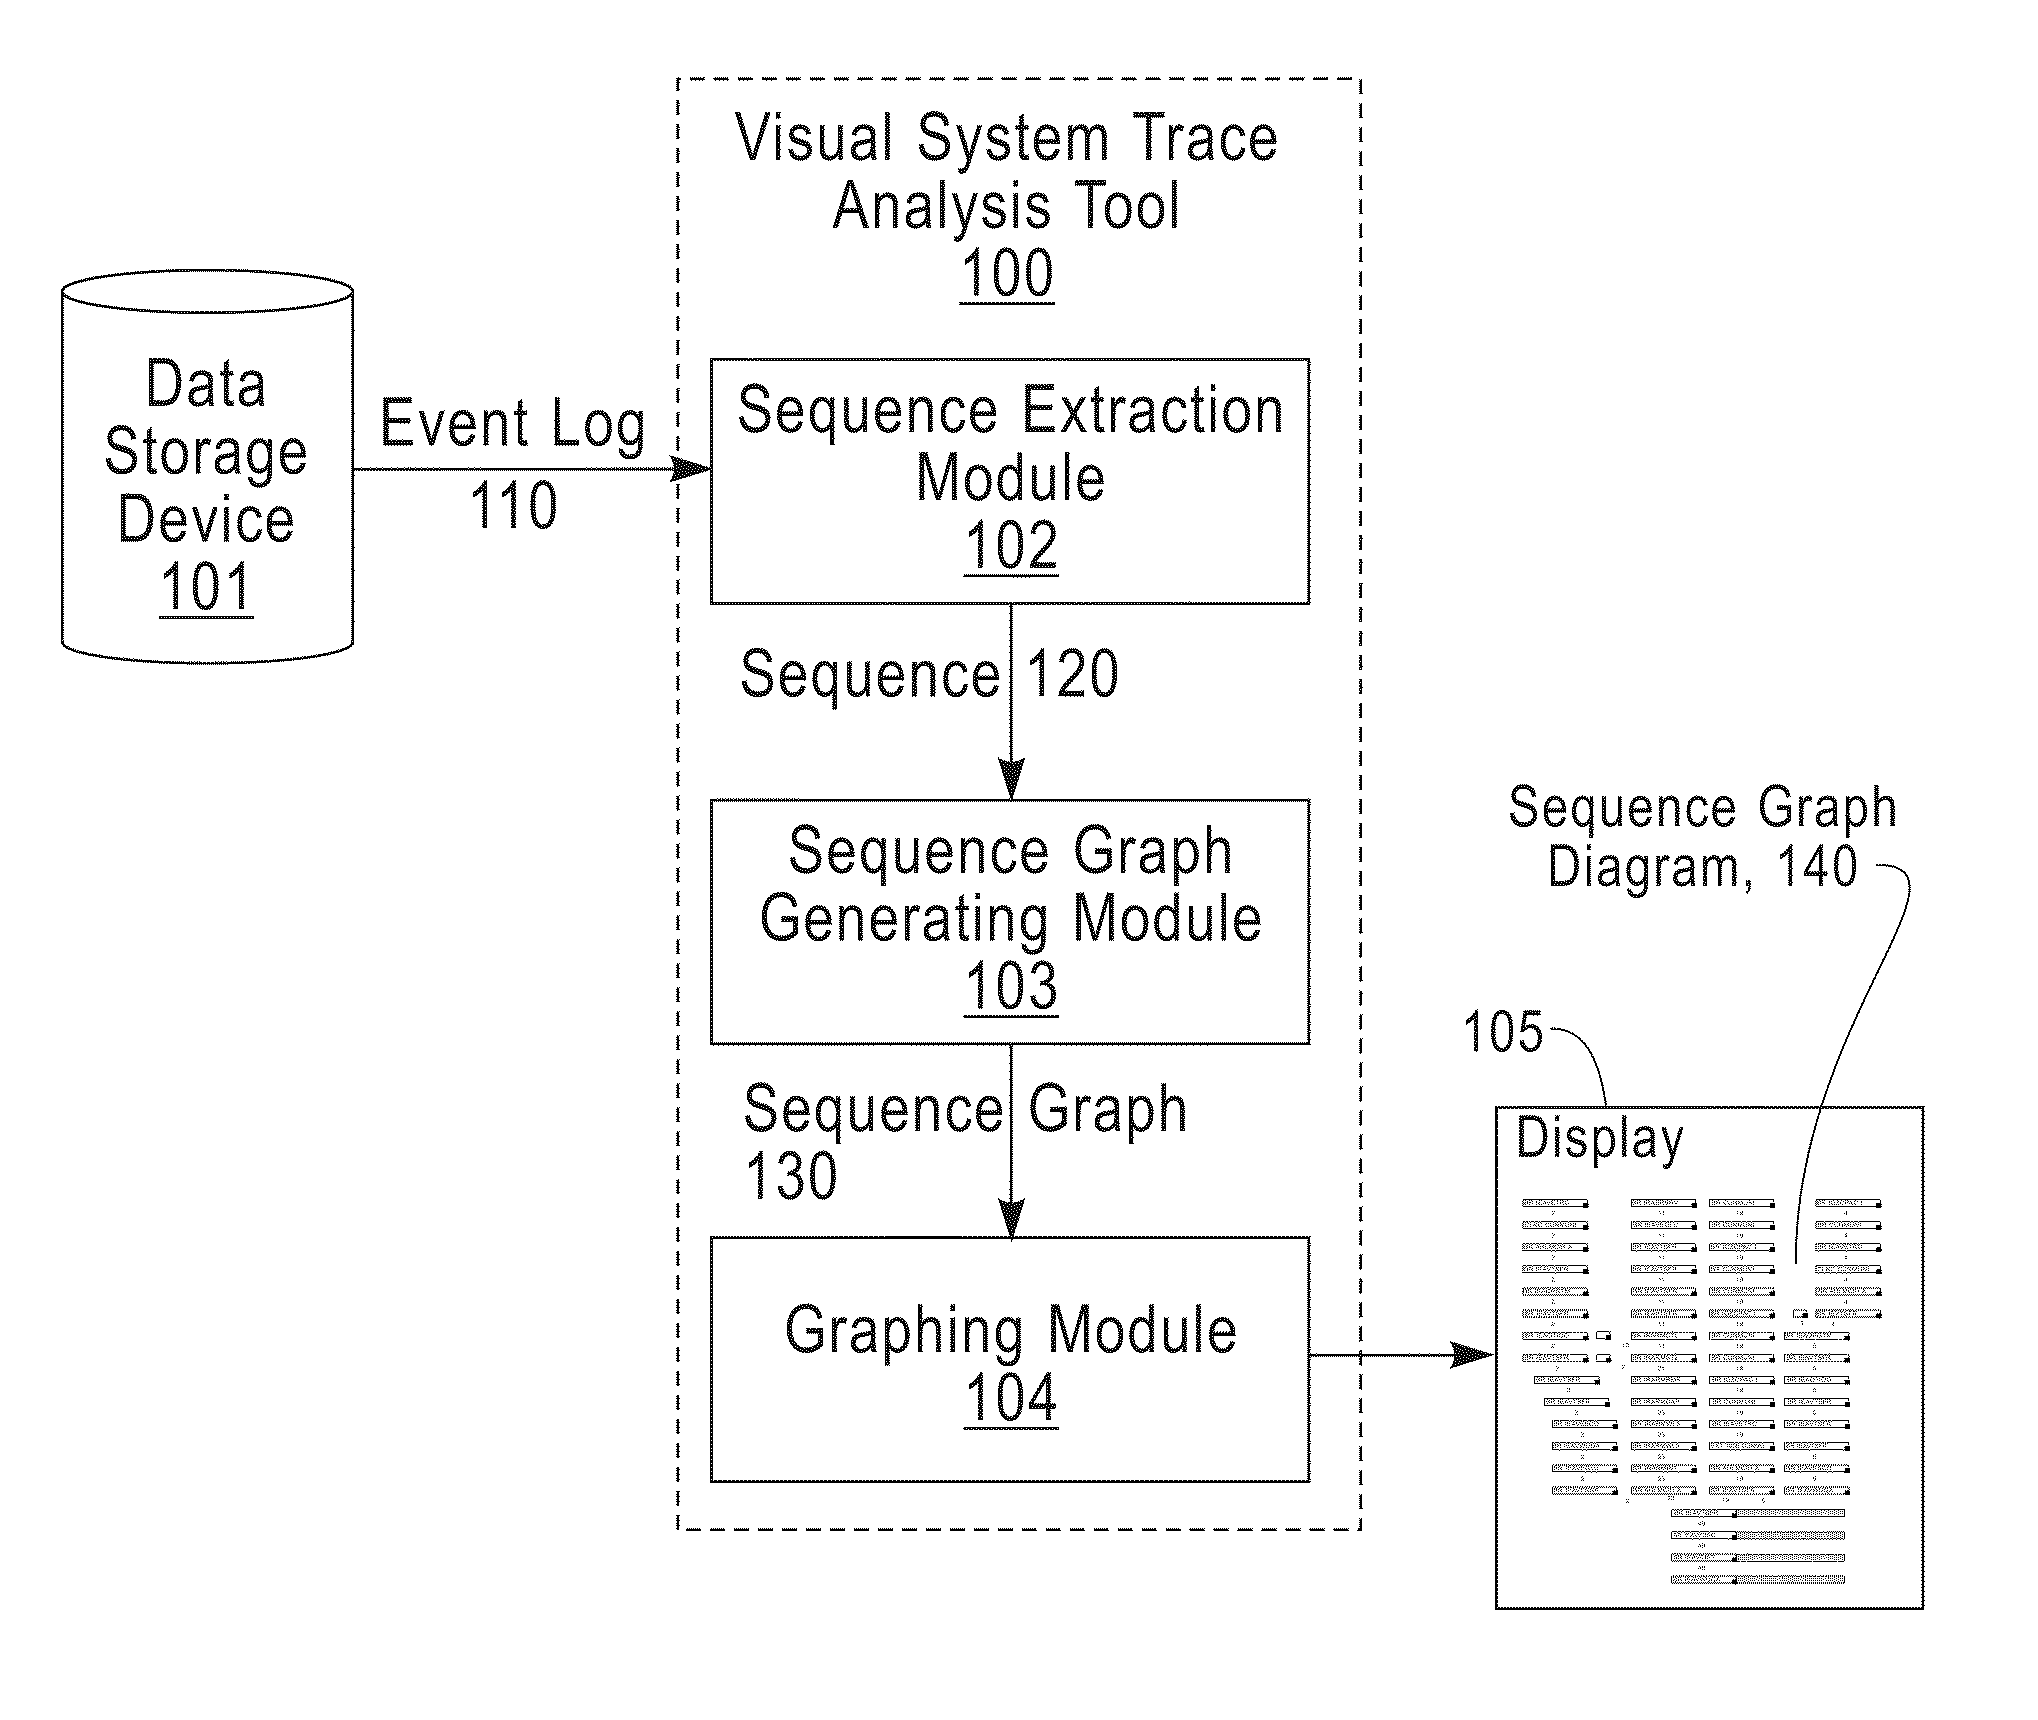 Displaying a visualization of event instances and common event sequences